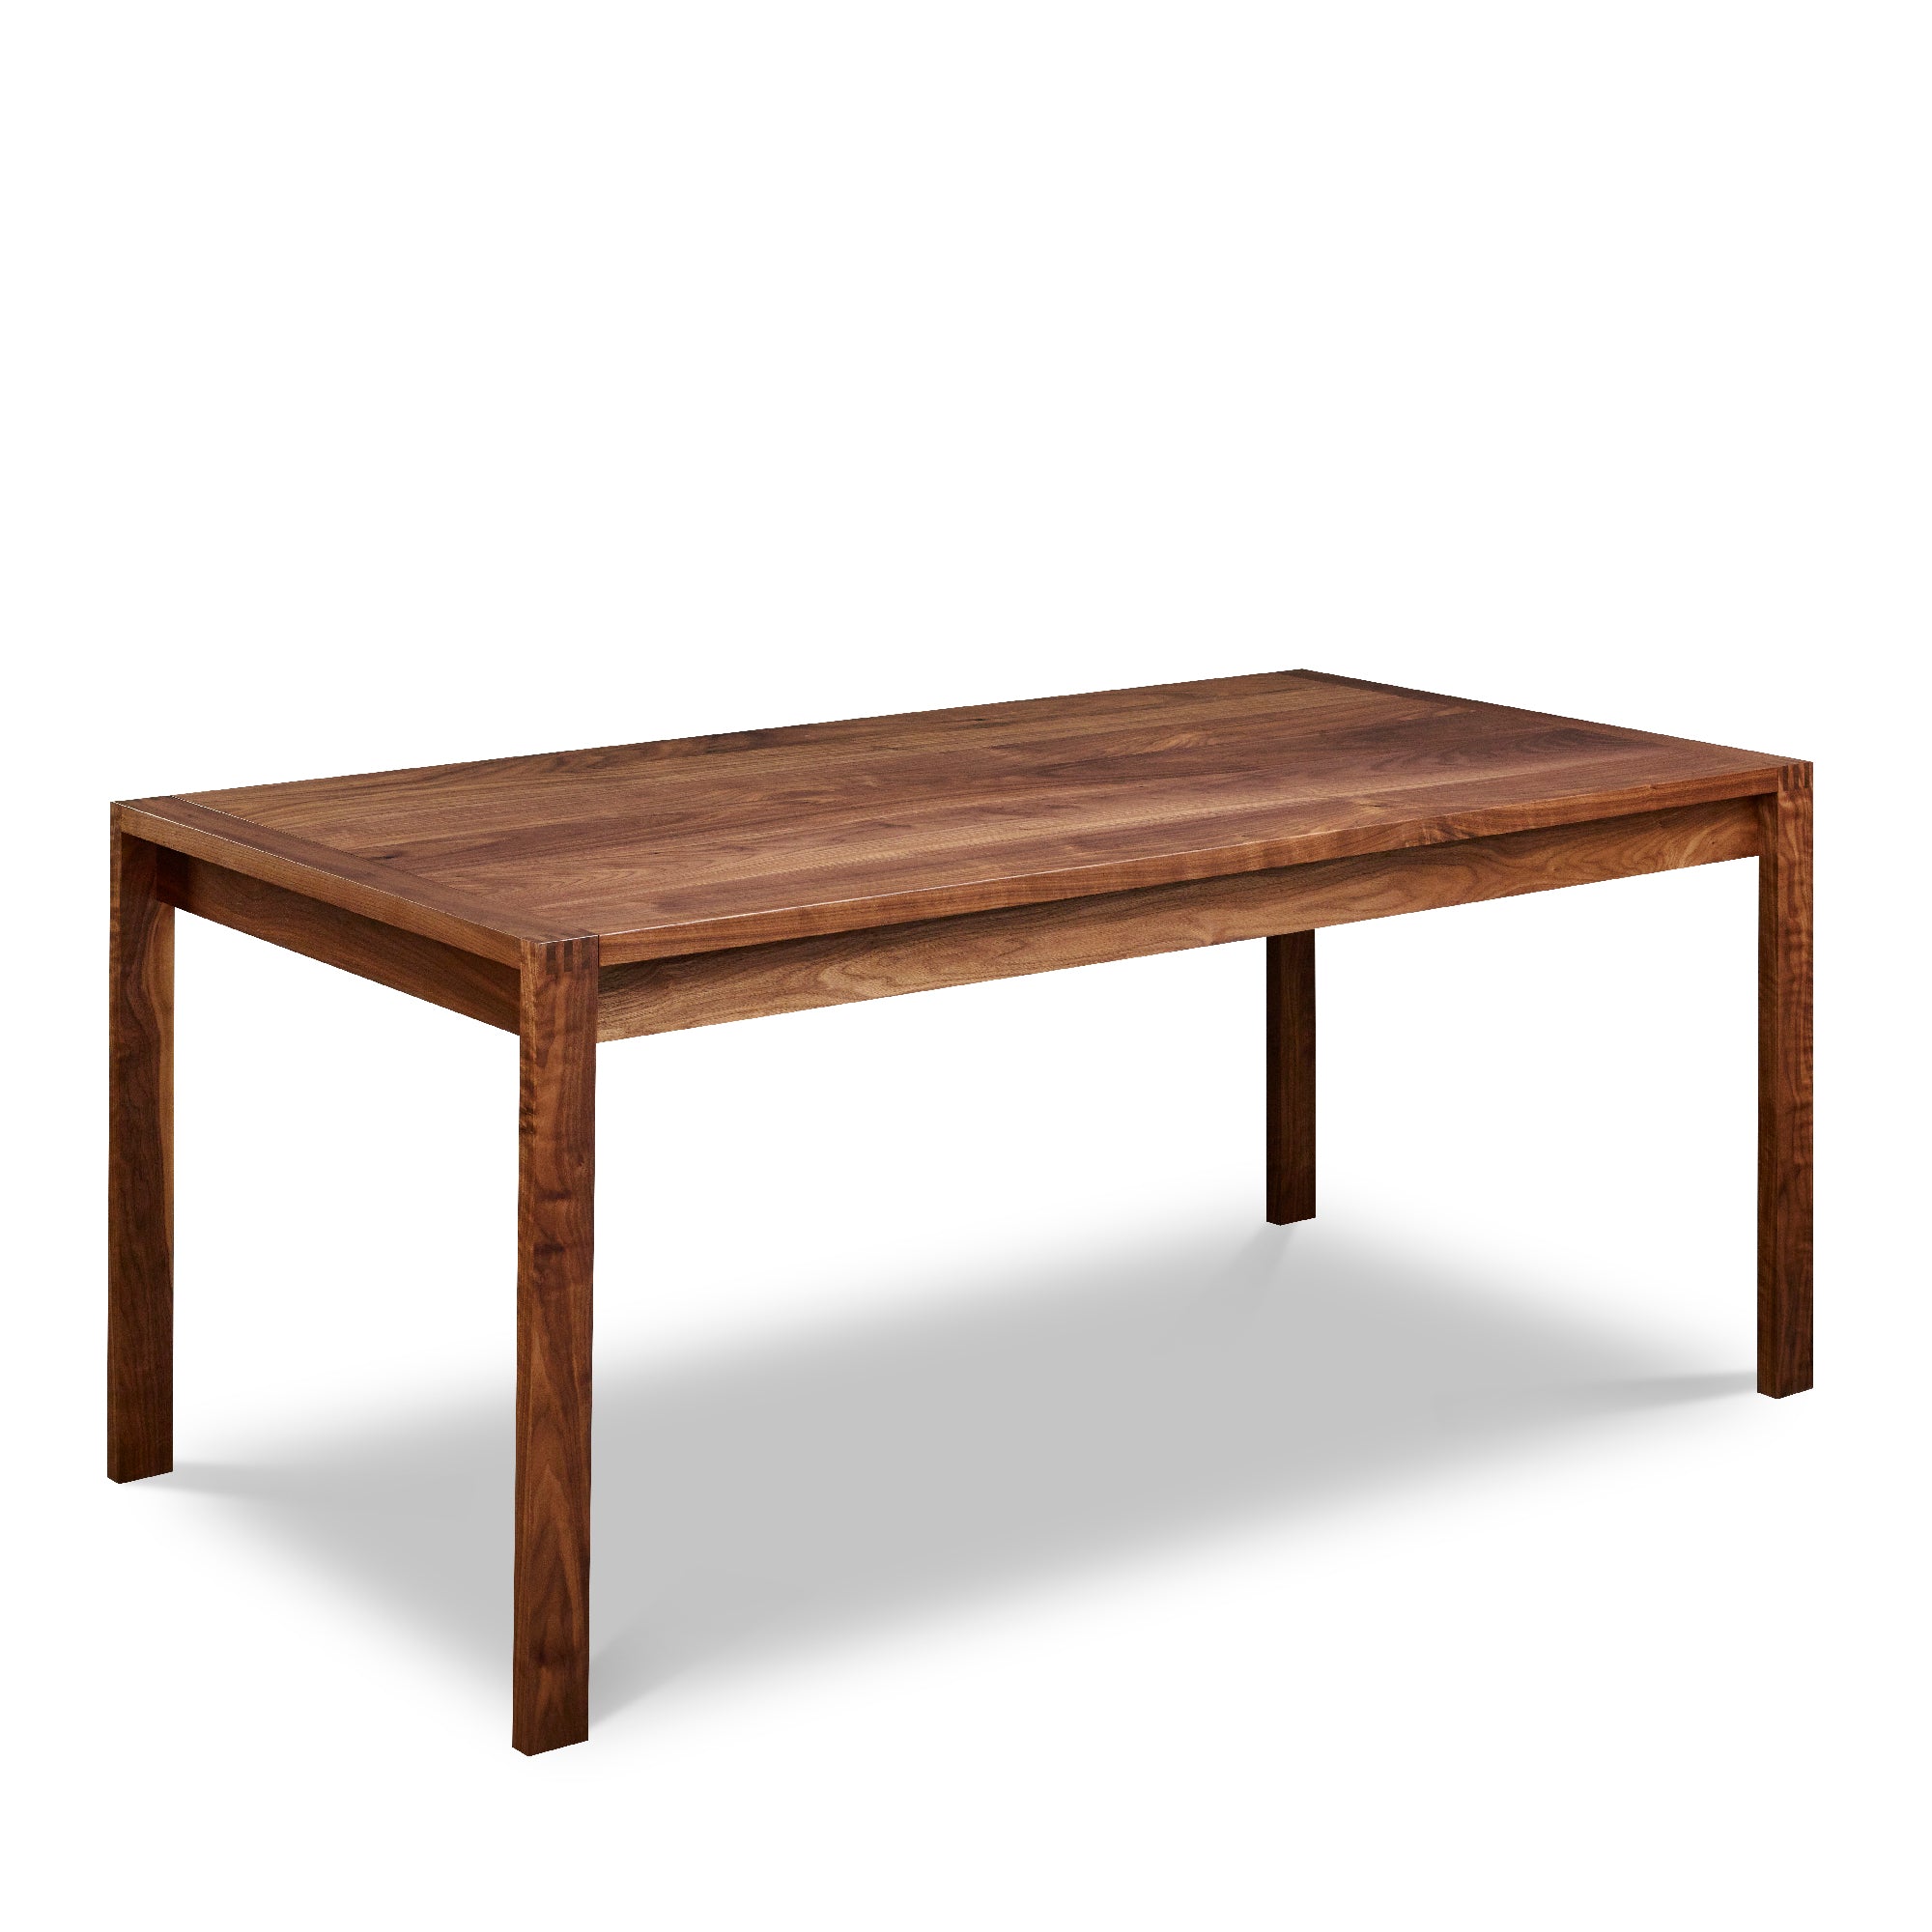 Modern parsons table with visible joinery in walnut, from Maine's Chilton Furniture Co.